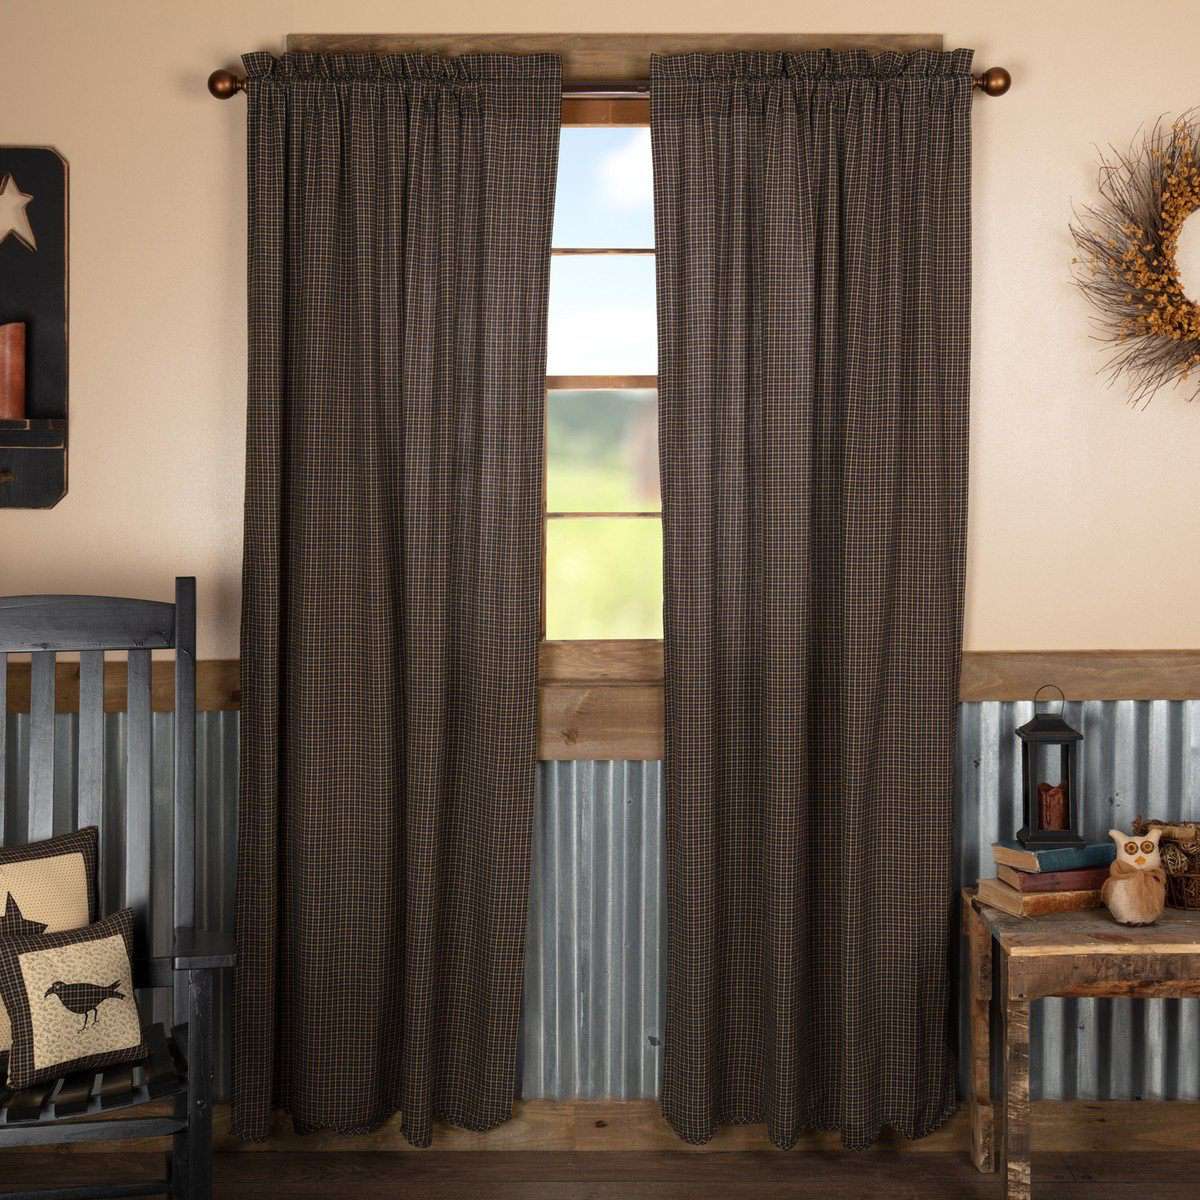 Kettle Grove Plaid Panel Country Curtain Scalloped Set of 2 84"x40" VHC Brands - The Fox Decor